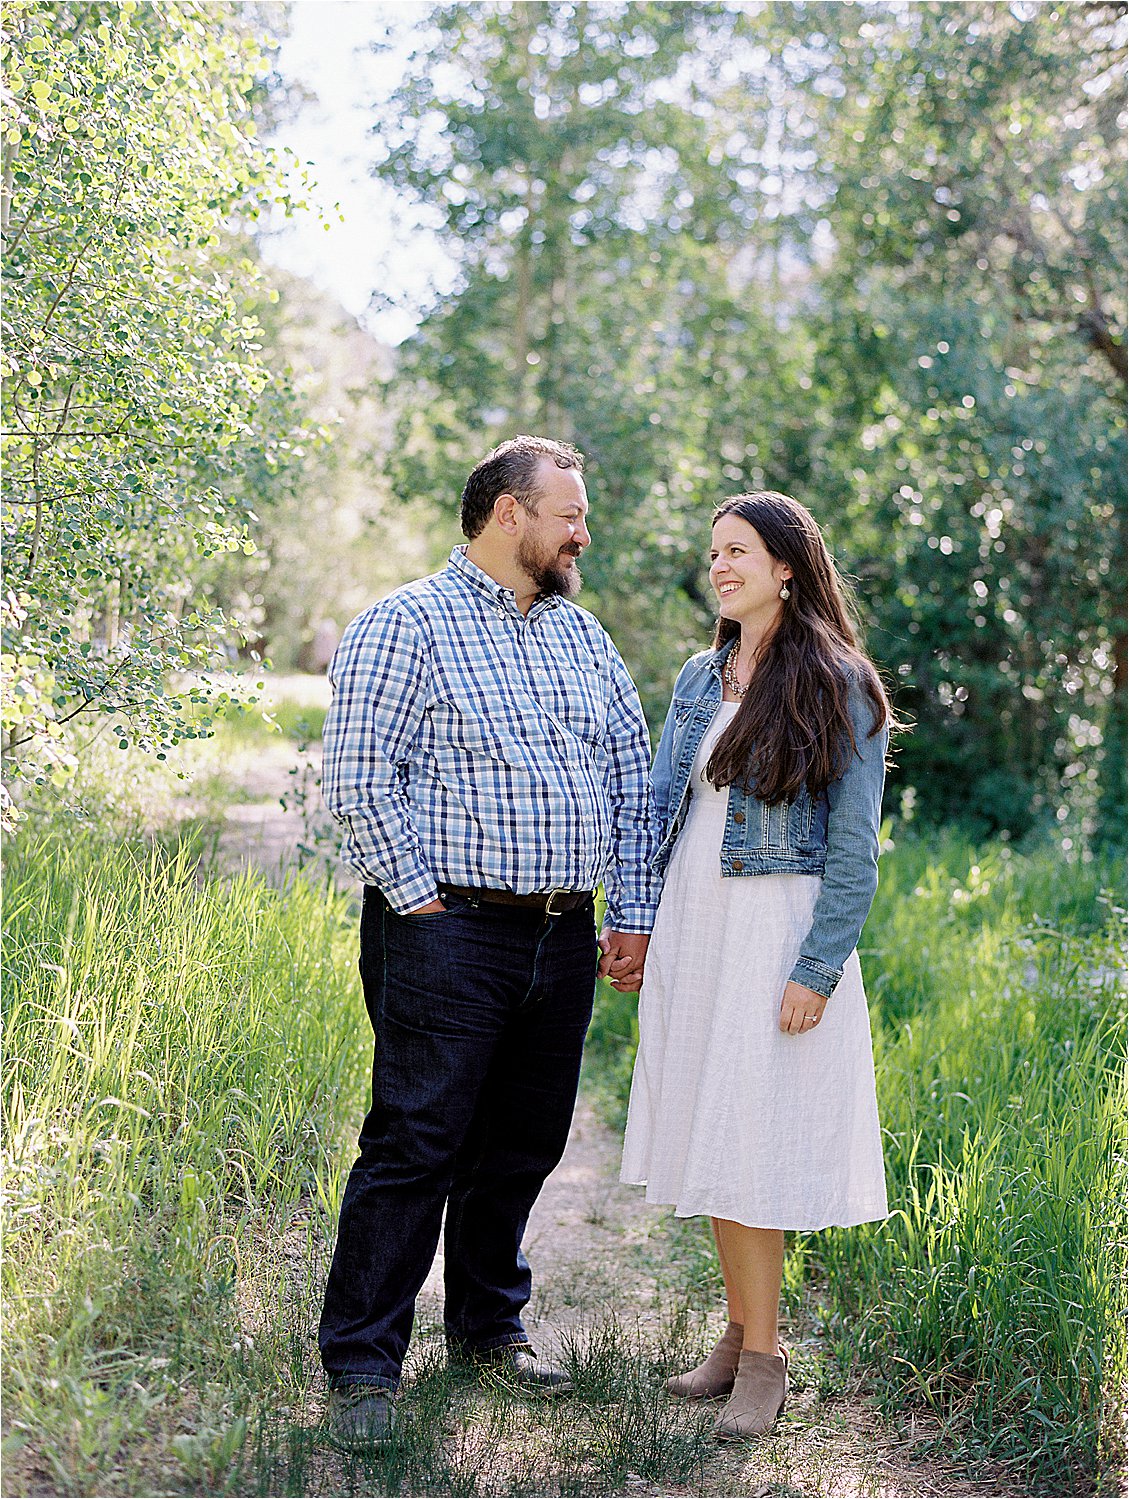 Casual Engagement Session photographed by Destination Film Wedding Photographer, Renee Hollingshead